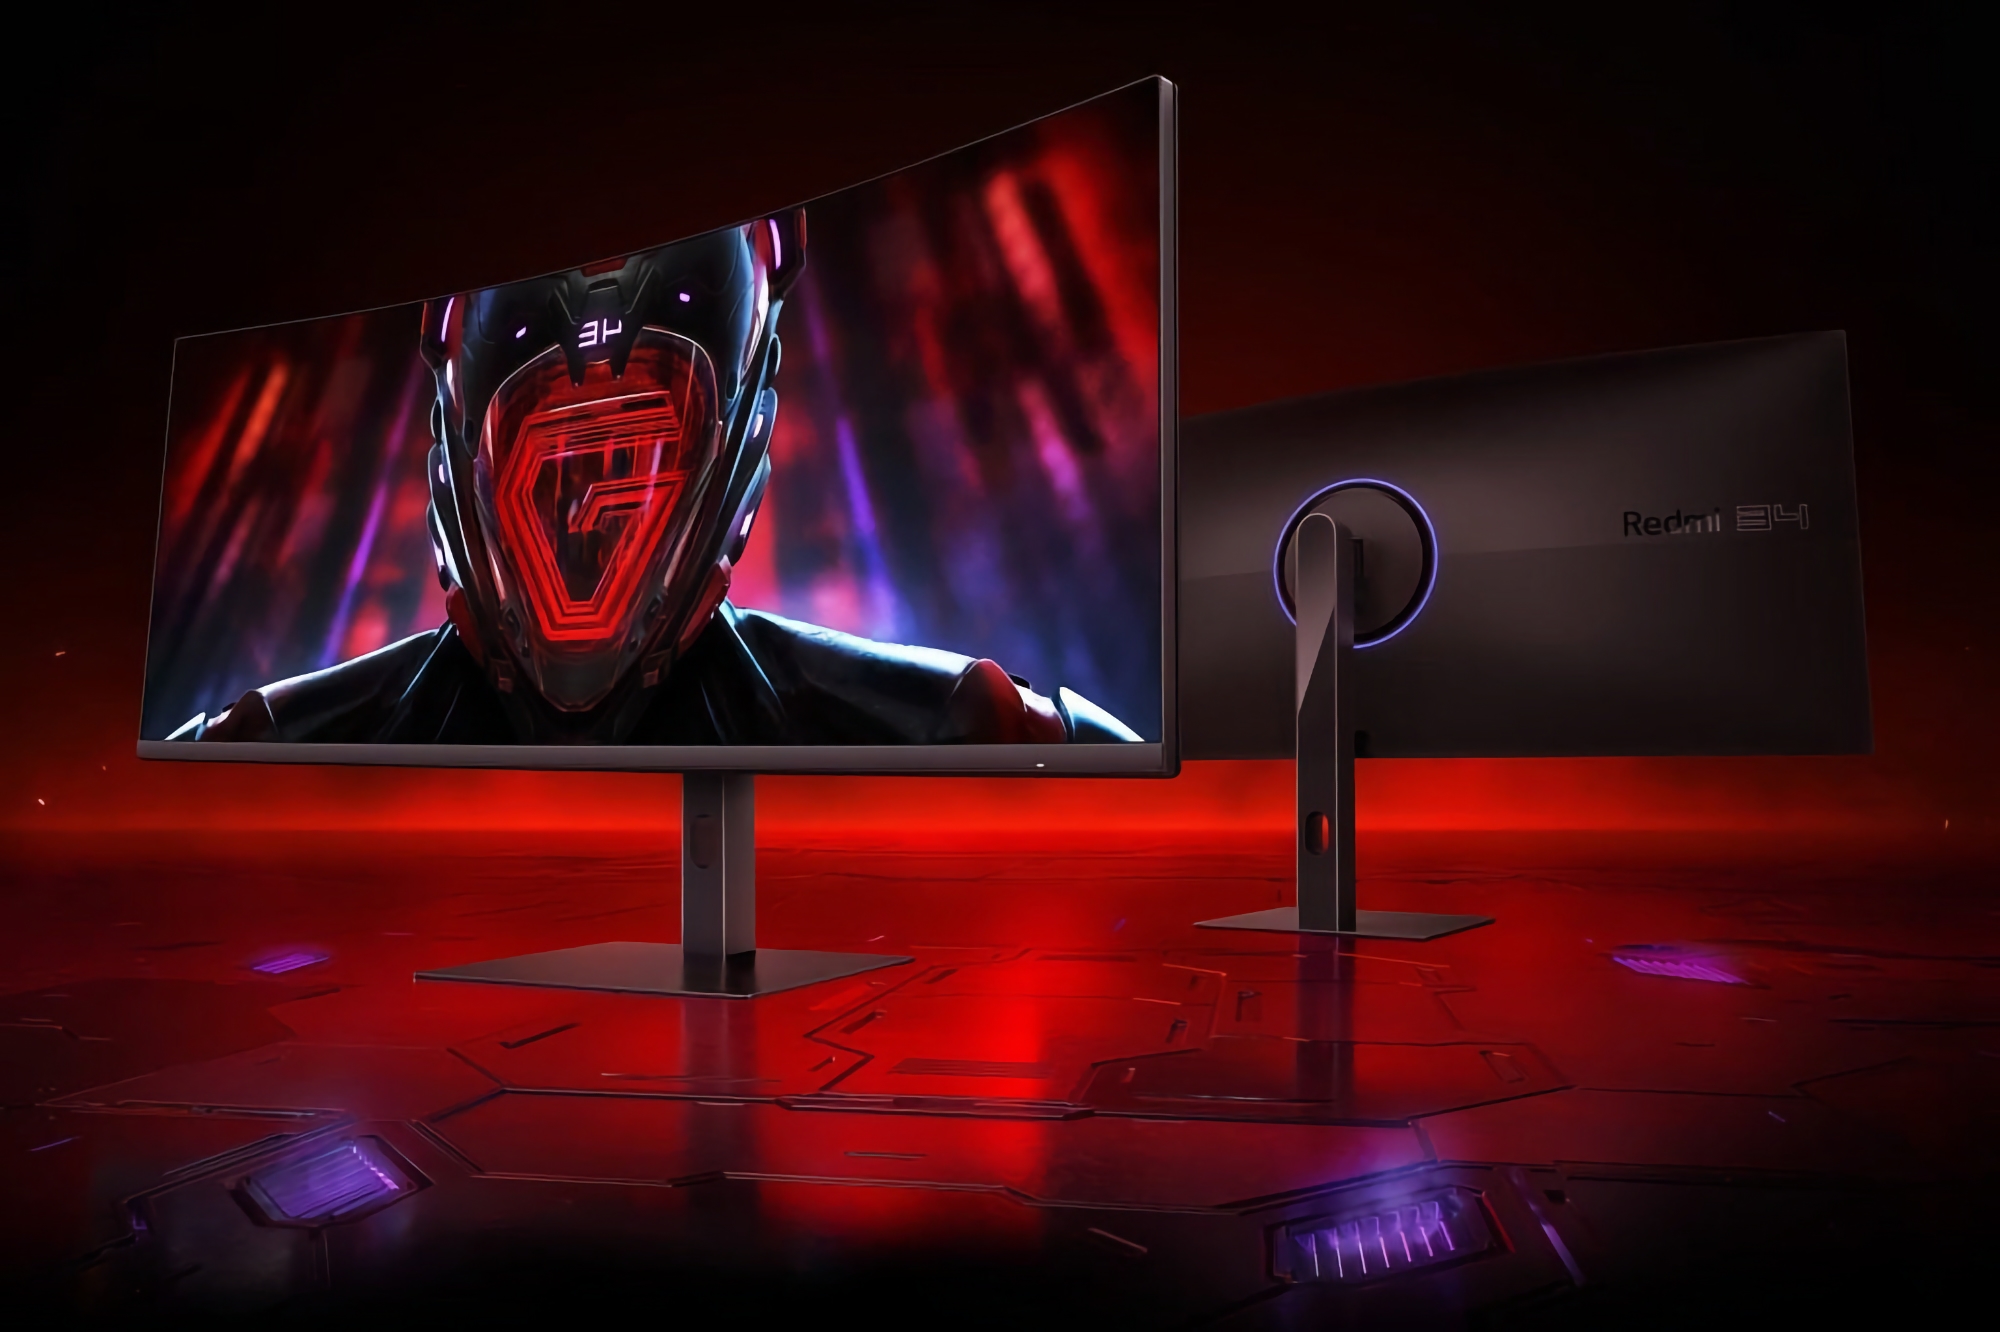 Xiaomi has unveiled the Redmi Monitor G34WQ gaming monitor with 180Hz support for $280